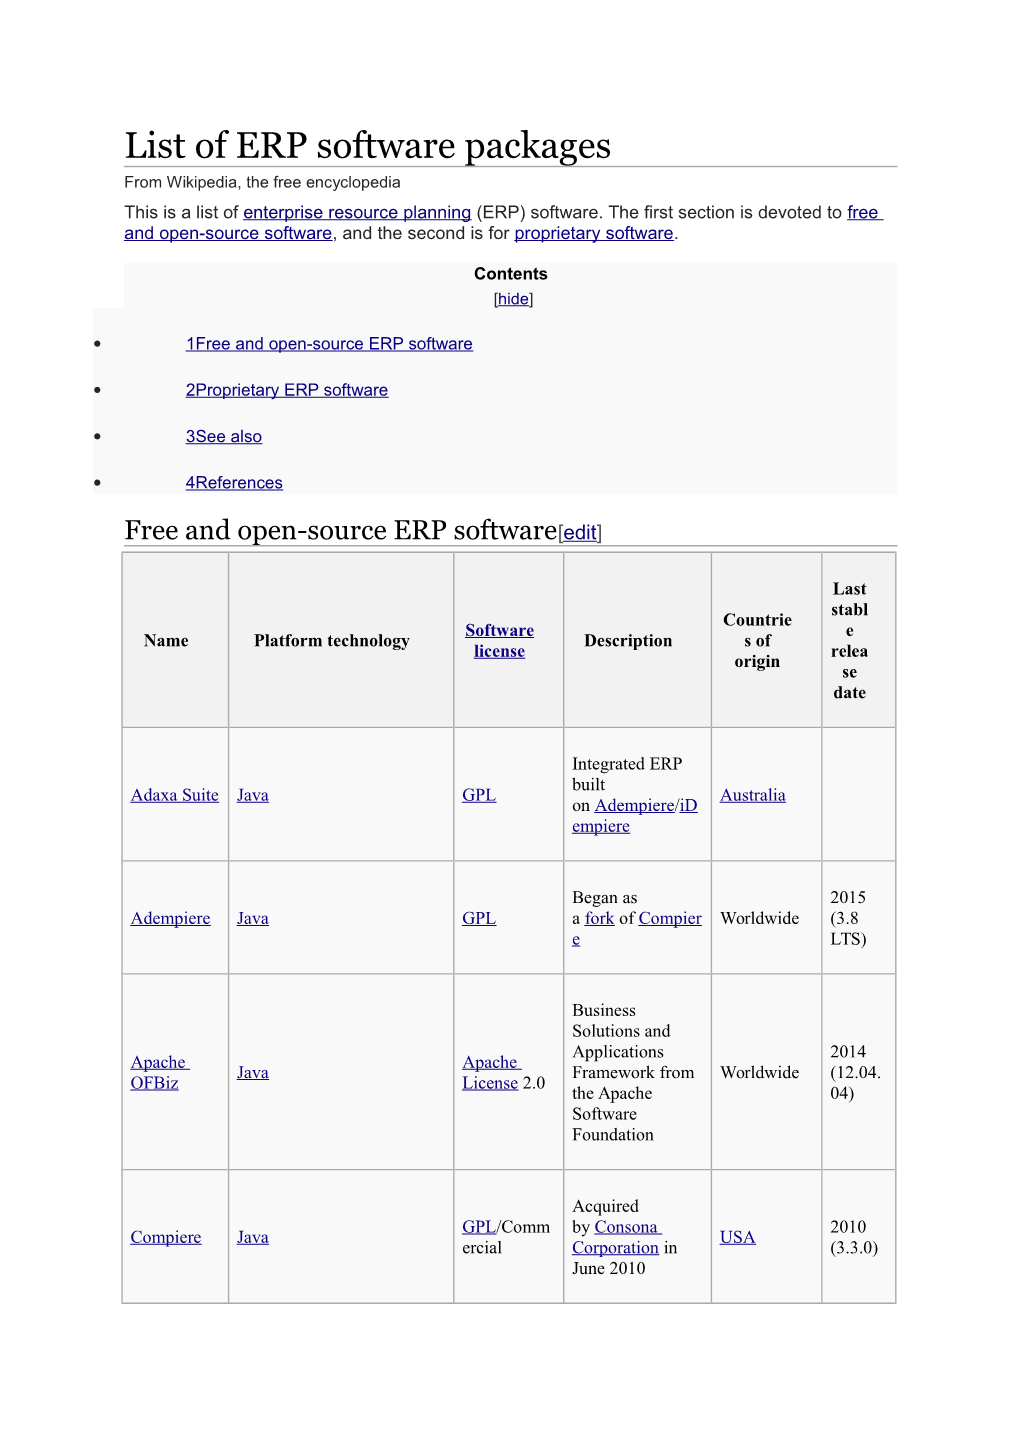 List of ERP Software Packages from Wikipedia, the Free Encyclopedia This Is a List of Enterprise Resource Planning (ERP) Software